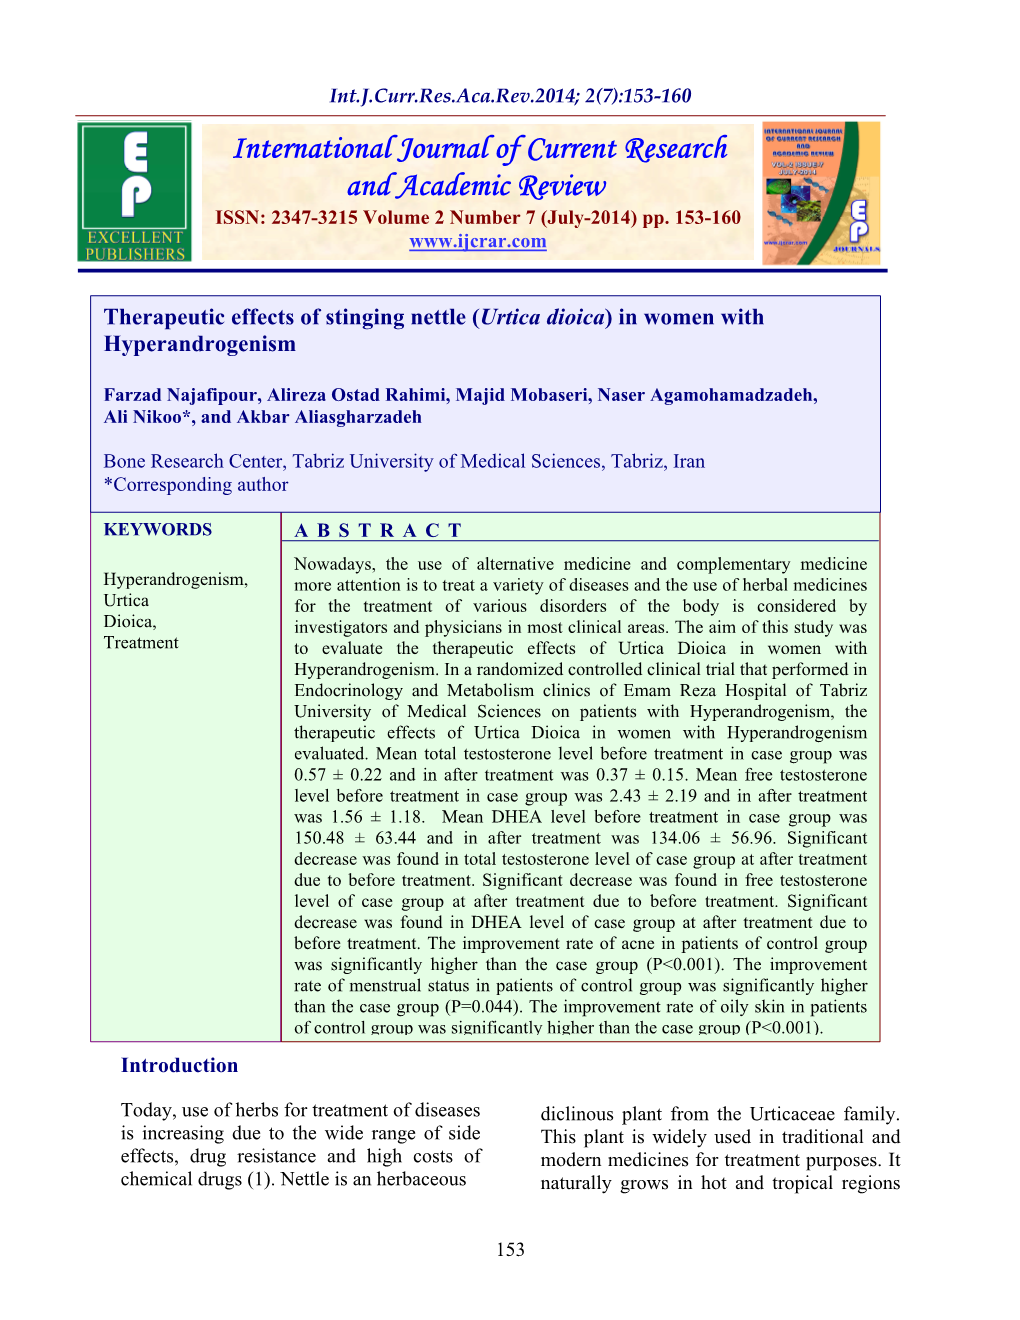 Therapeutic Effects of Stinging Nettle (Urtica Dioica) in Women with Hyperandrogenism